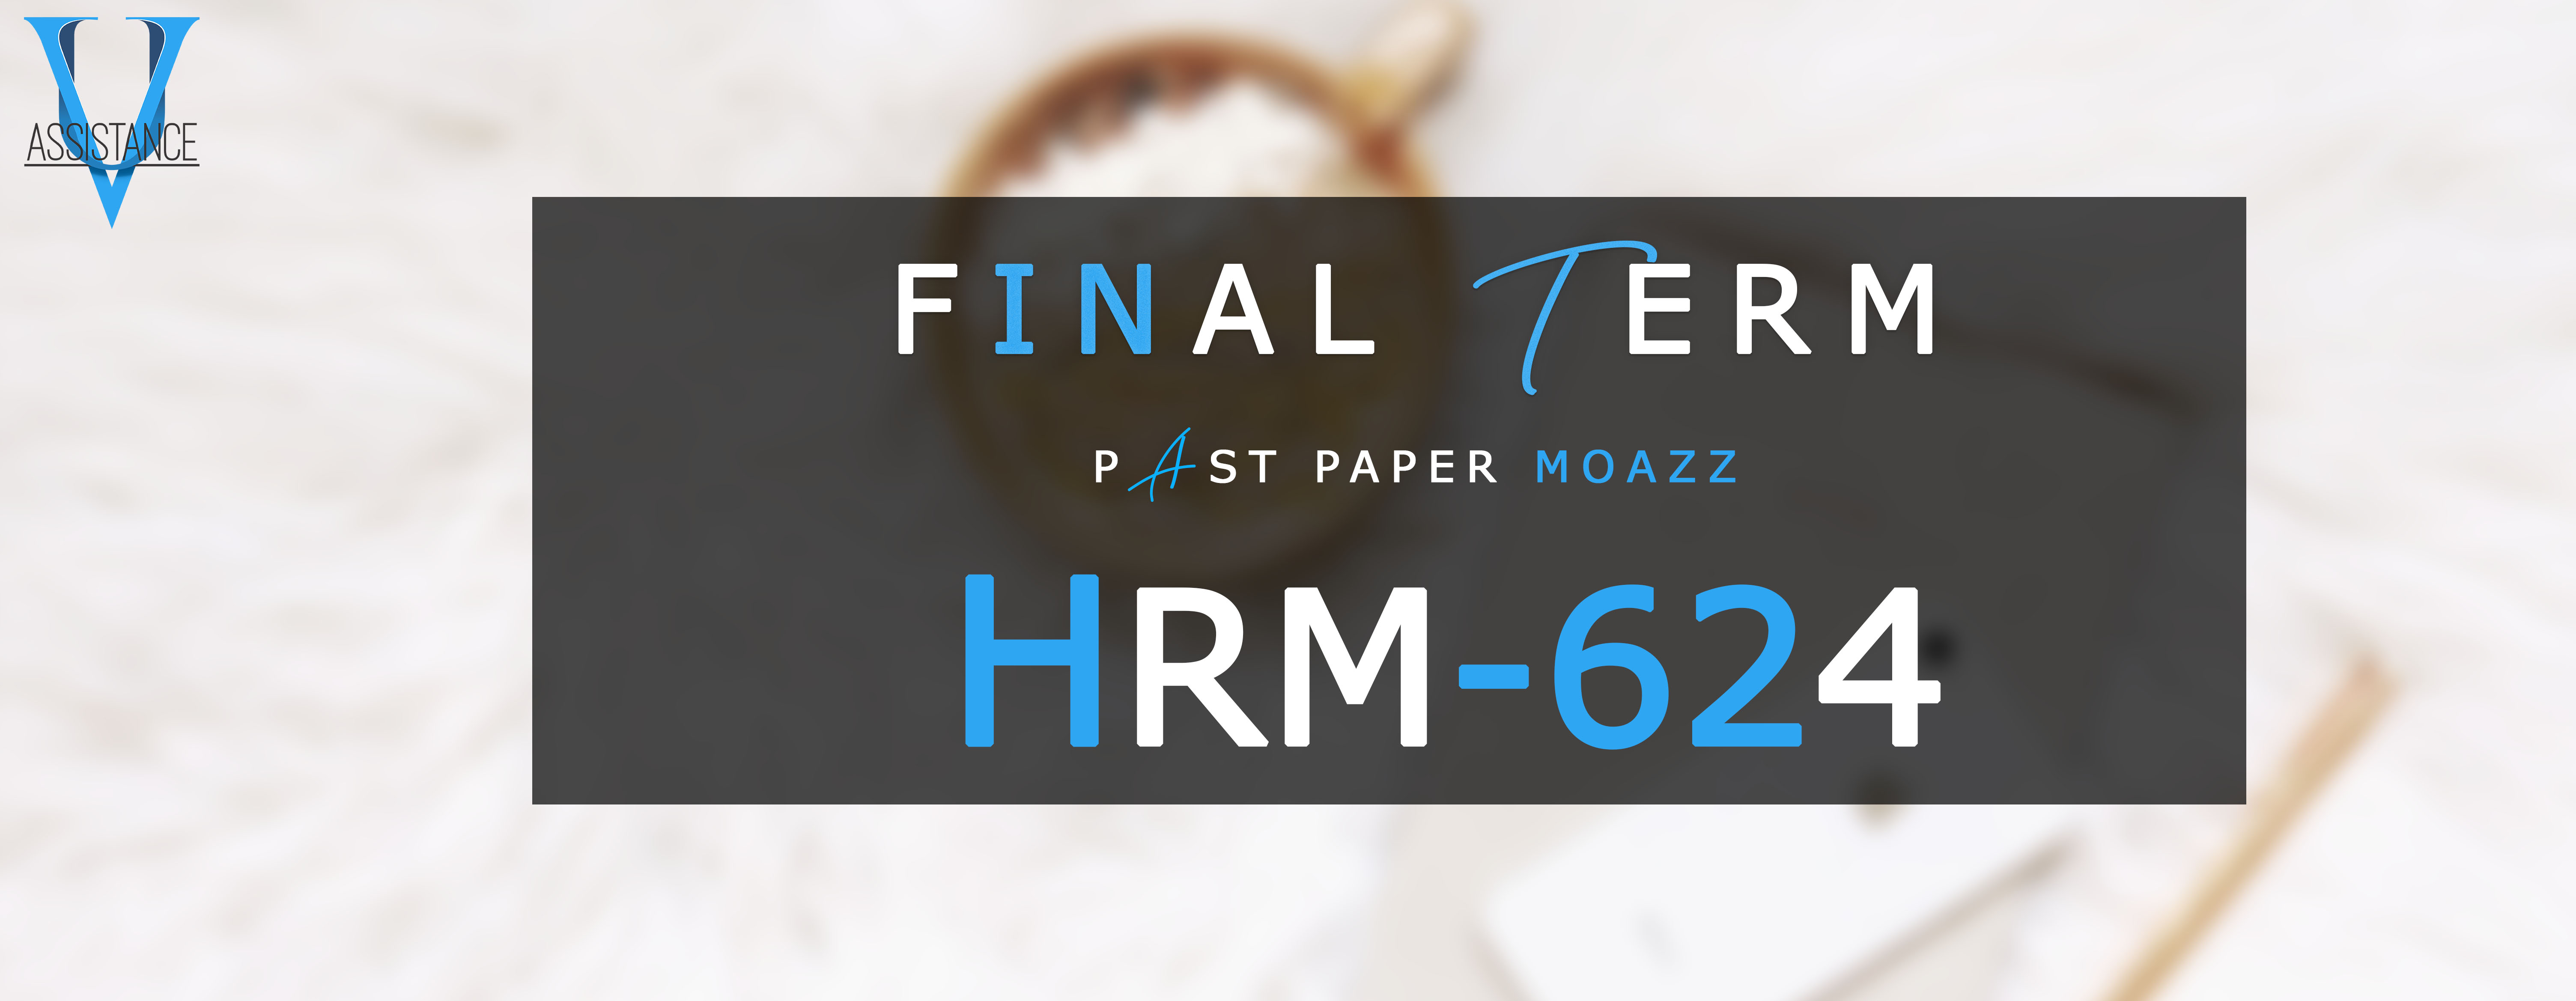 hrm624 assignment solution 2022